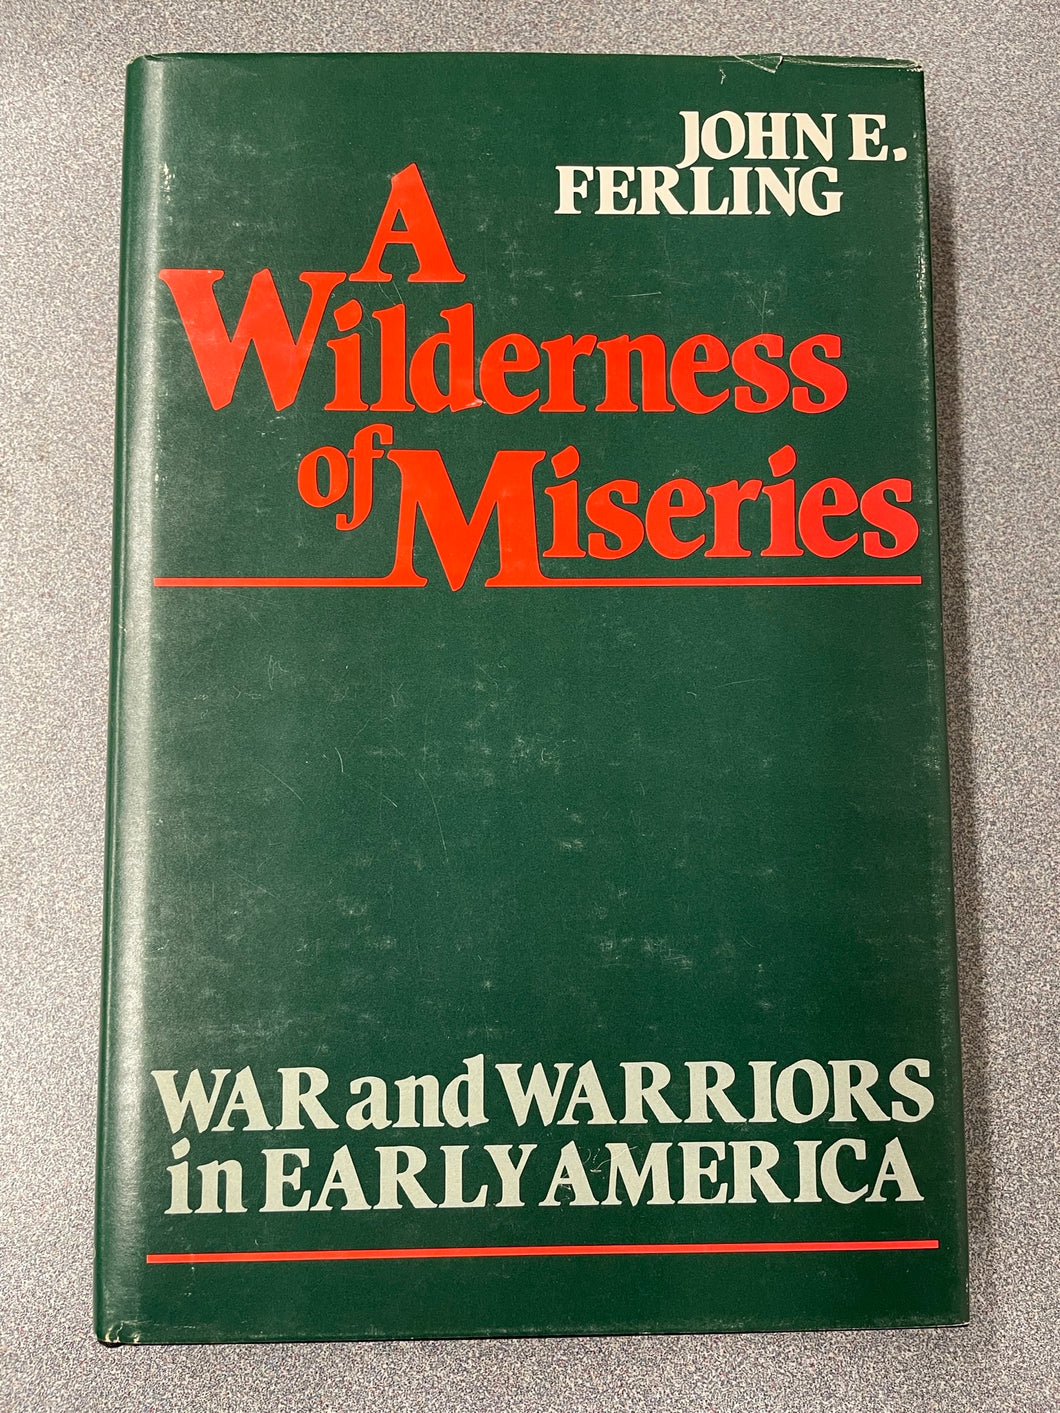 A Wilderness of Miseries: War and Warriors in Early America, Ferling, John E. [1980] ML 9/23